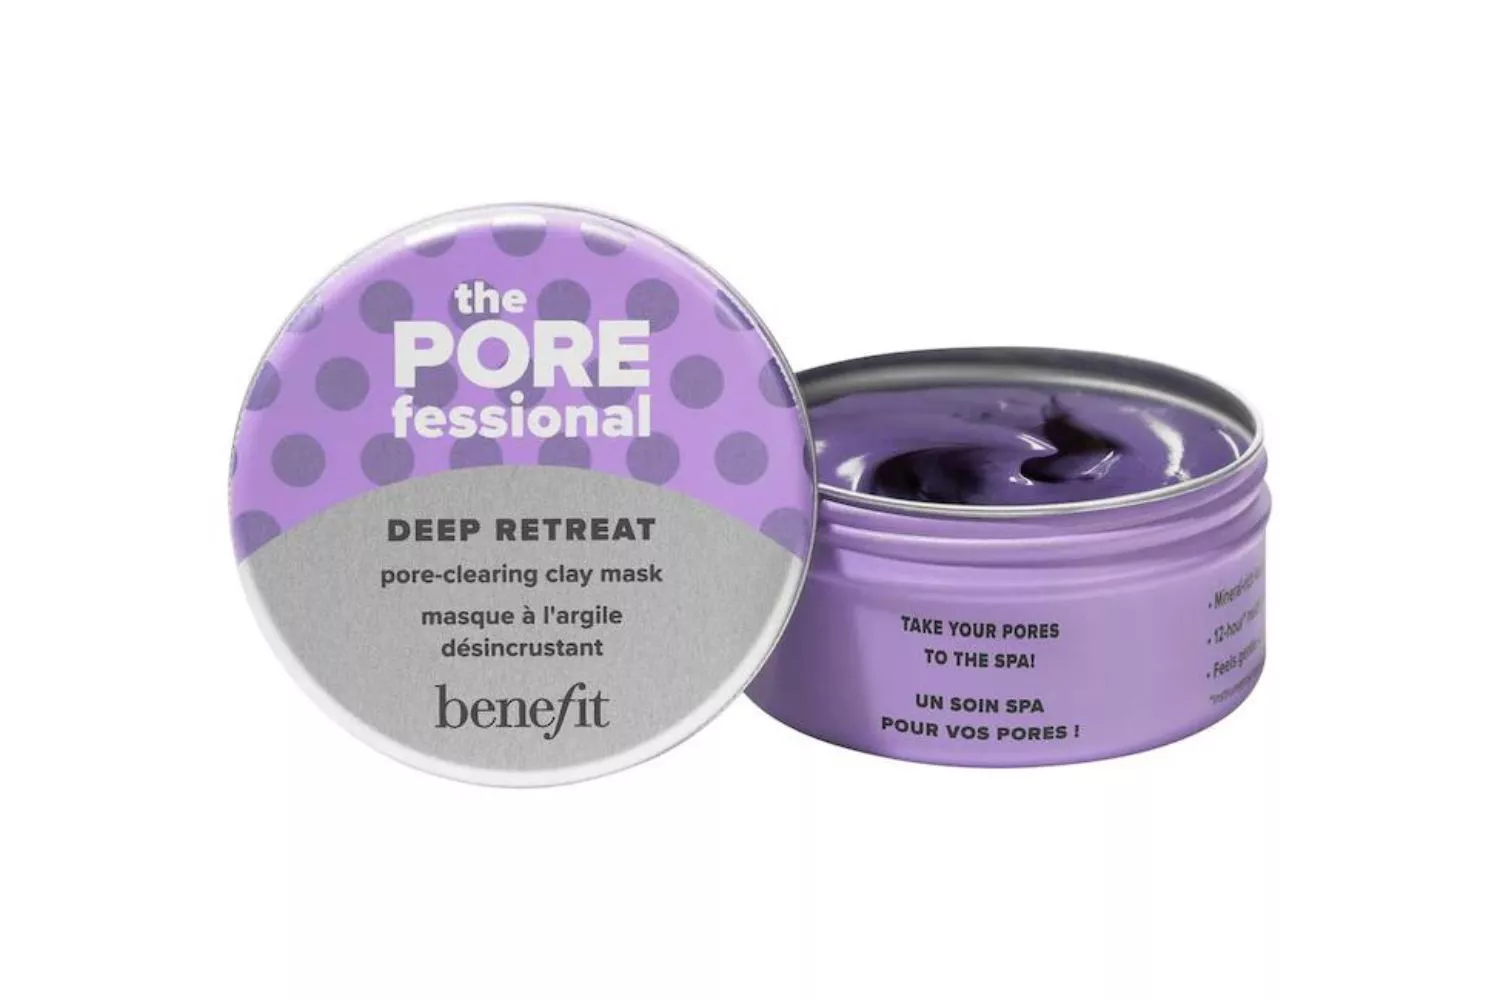 Benefit Cosmetics The POREfessional Deep Retreat Pore-Clearing Kaolin Clay Mask